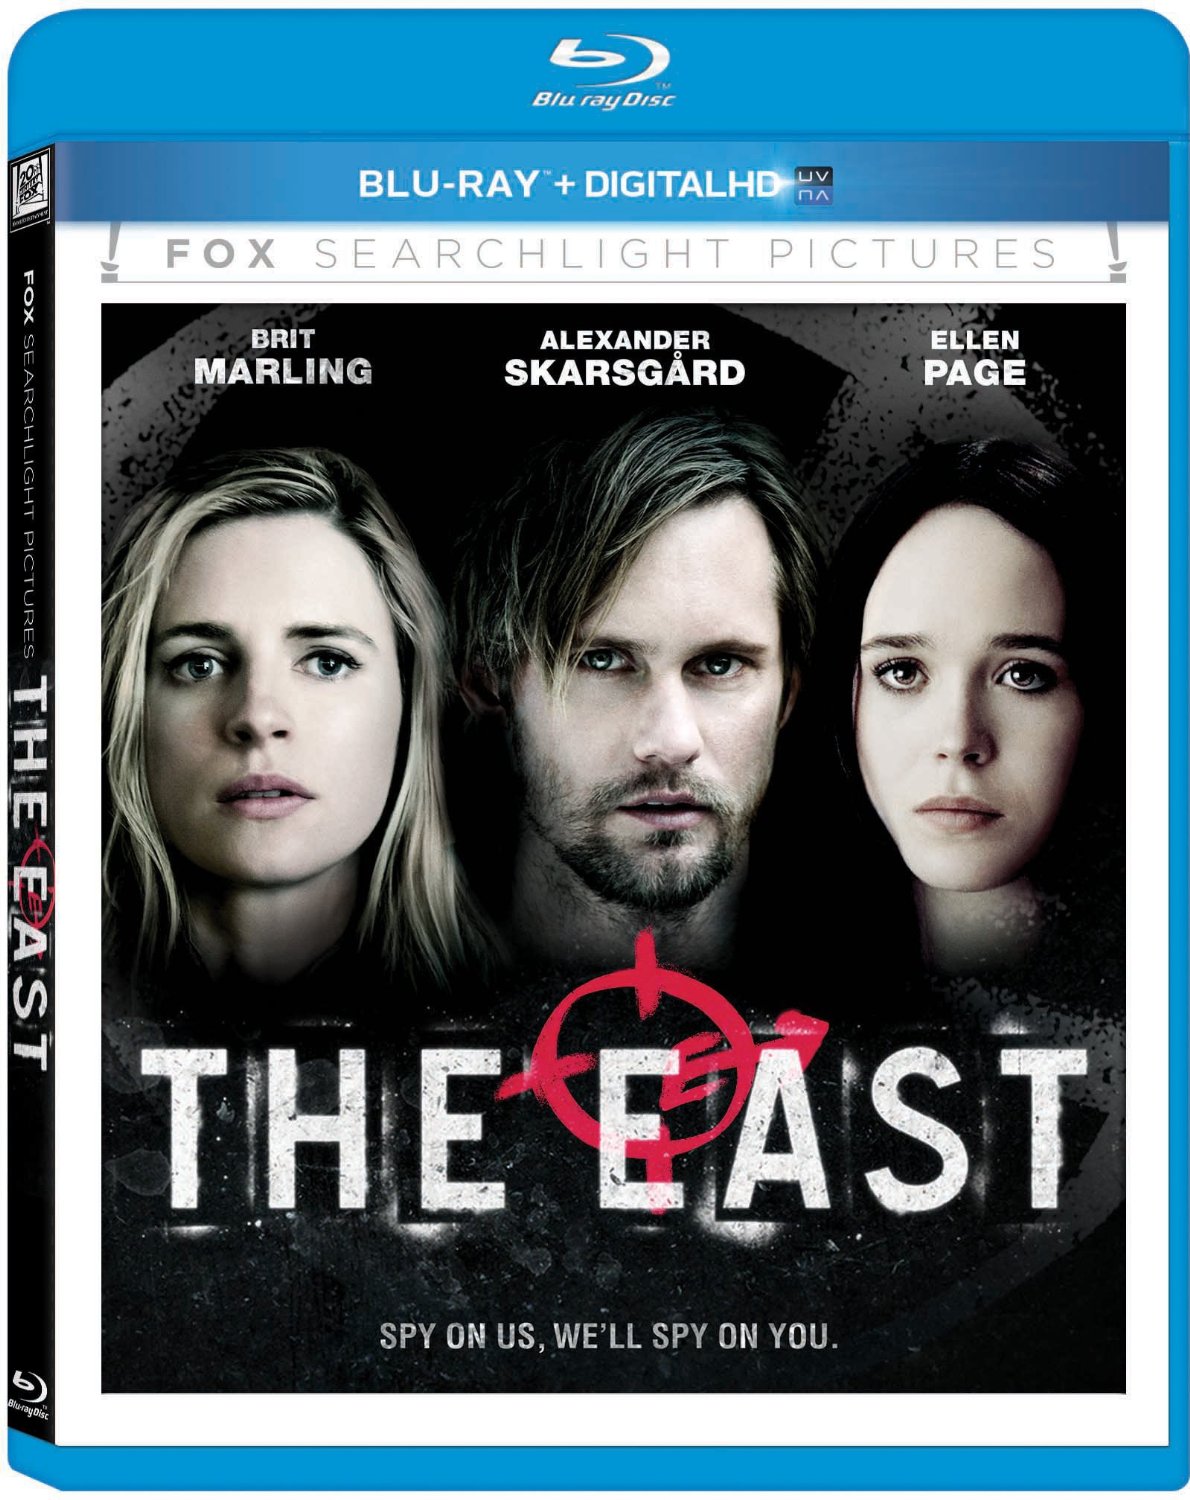 DVD Reviews: The East